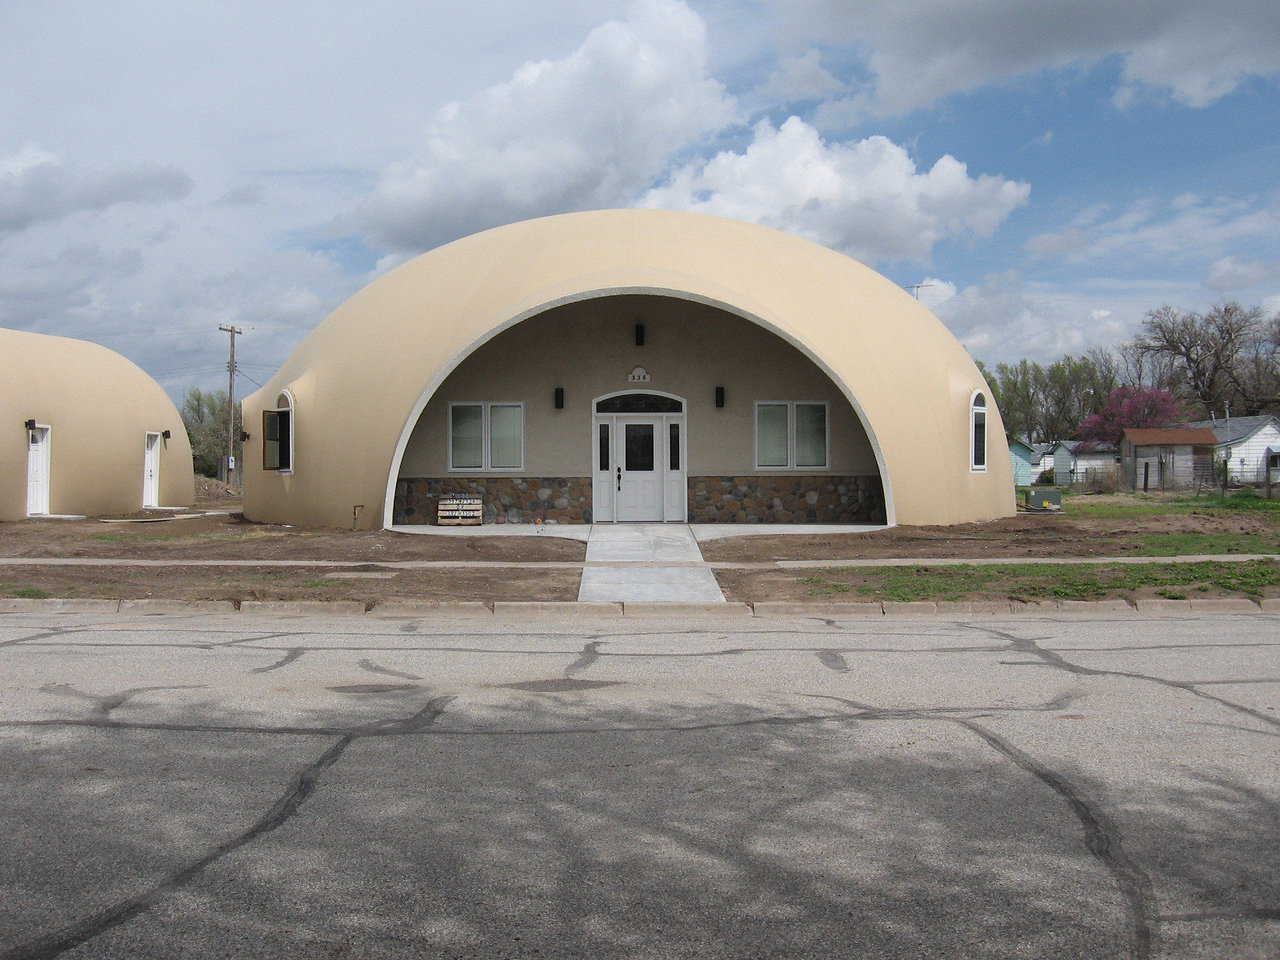 Mudd-Puddle Dome On The Prairie — In about 7 months, Kay and Ernest Mudd of Dighton, Kansas have proudly shown their Monolithic Dome home and garage to 1000 visitors.